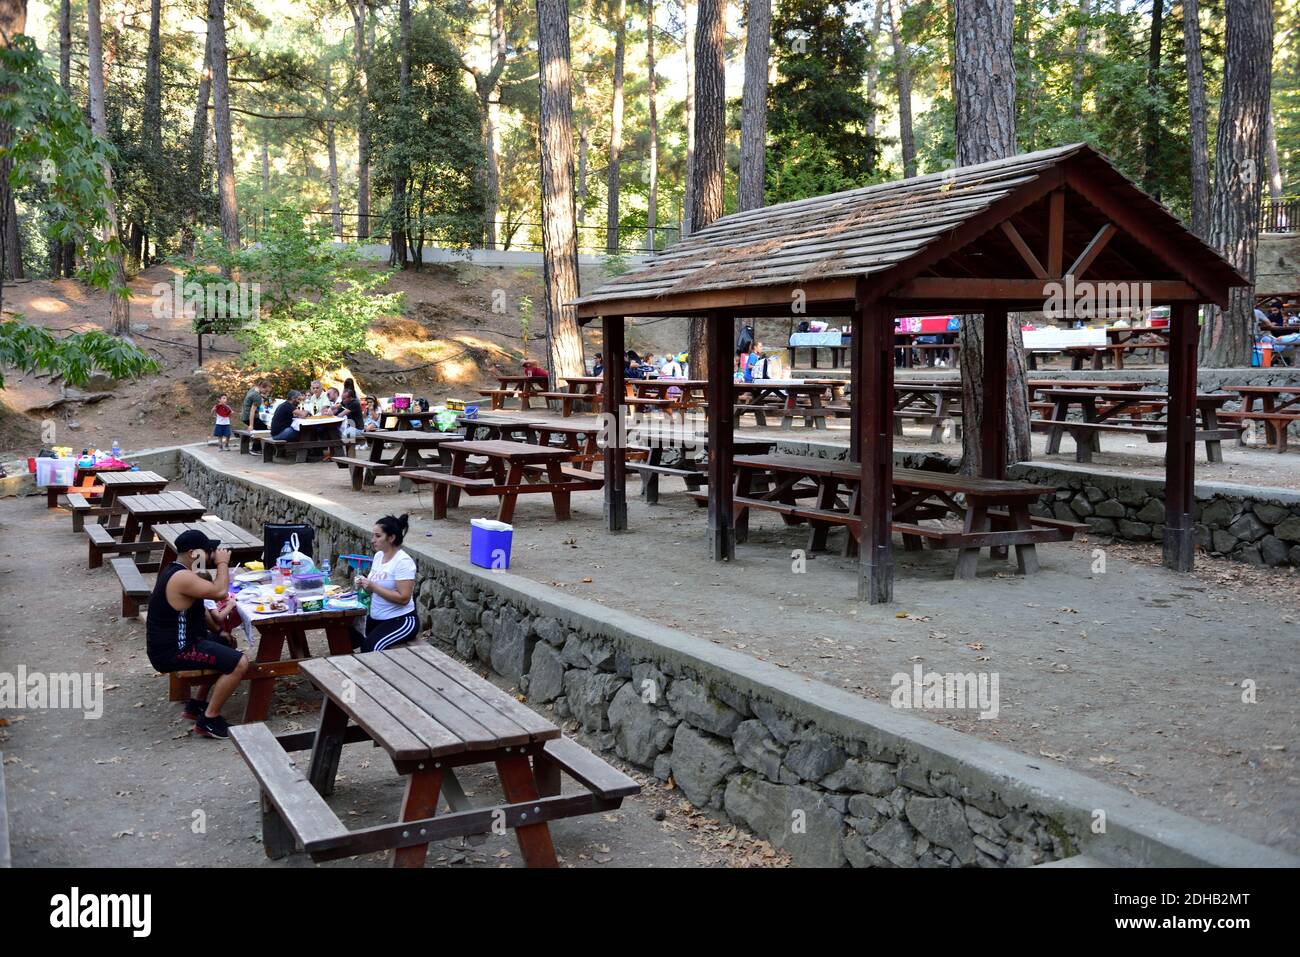 Picnic and BBQ area in Platania nature reserve by Troodos mountains, Cyprus Stock Photo